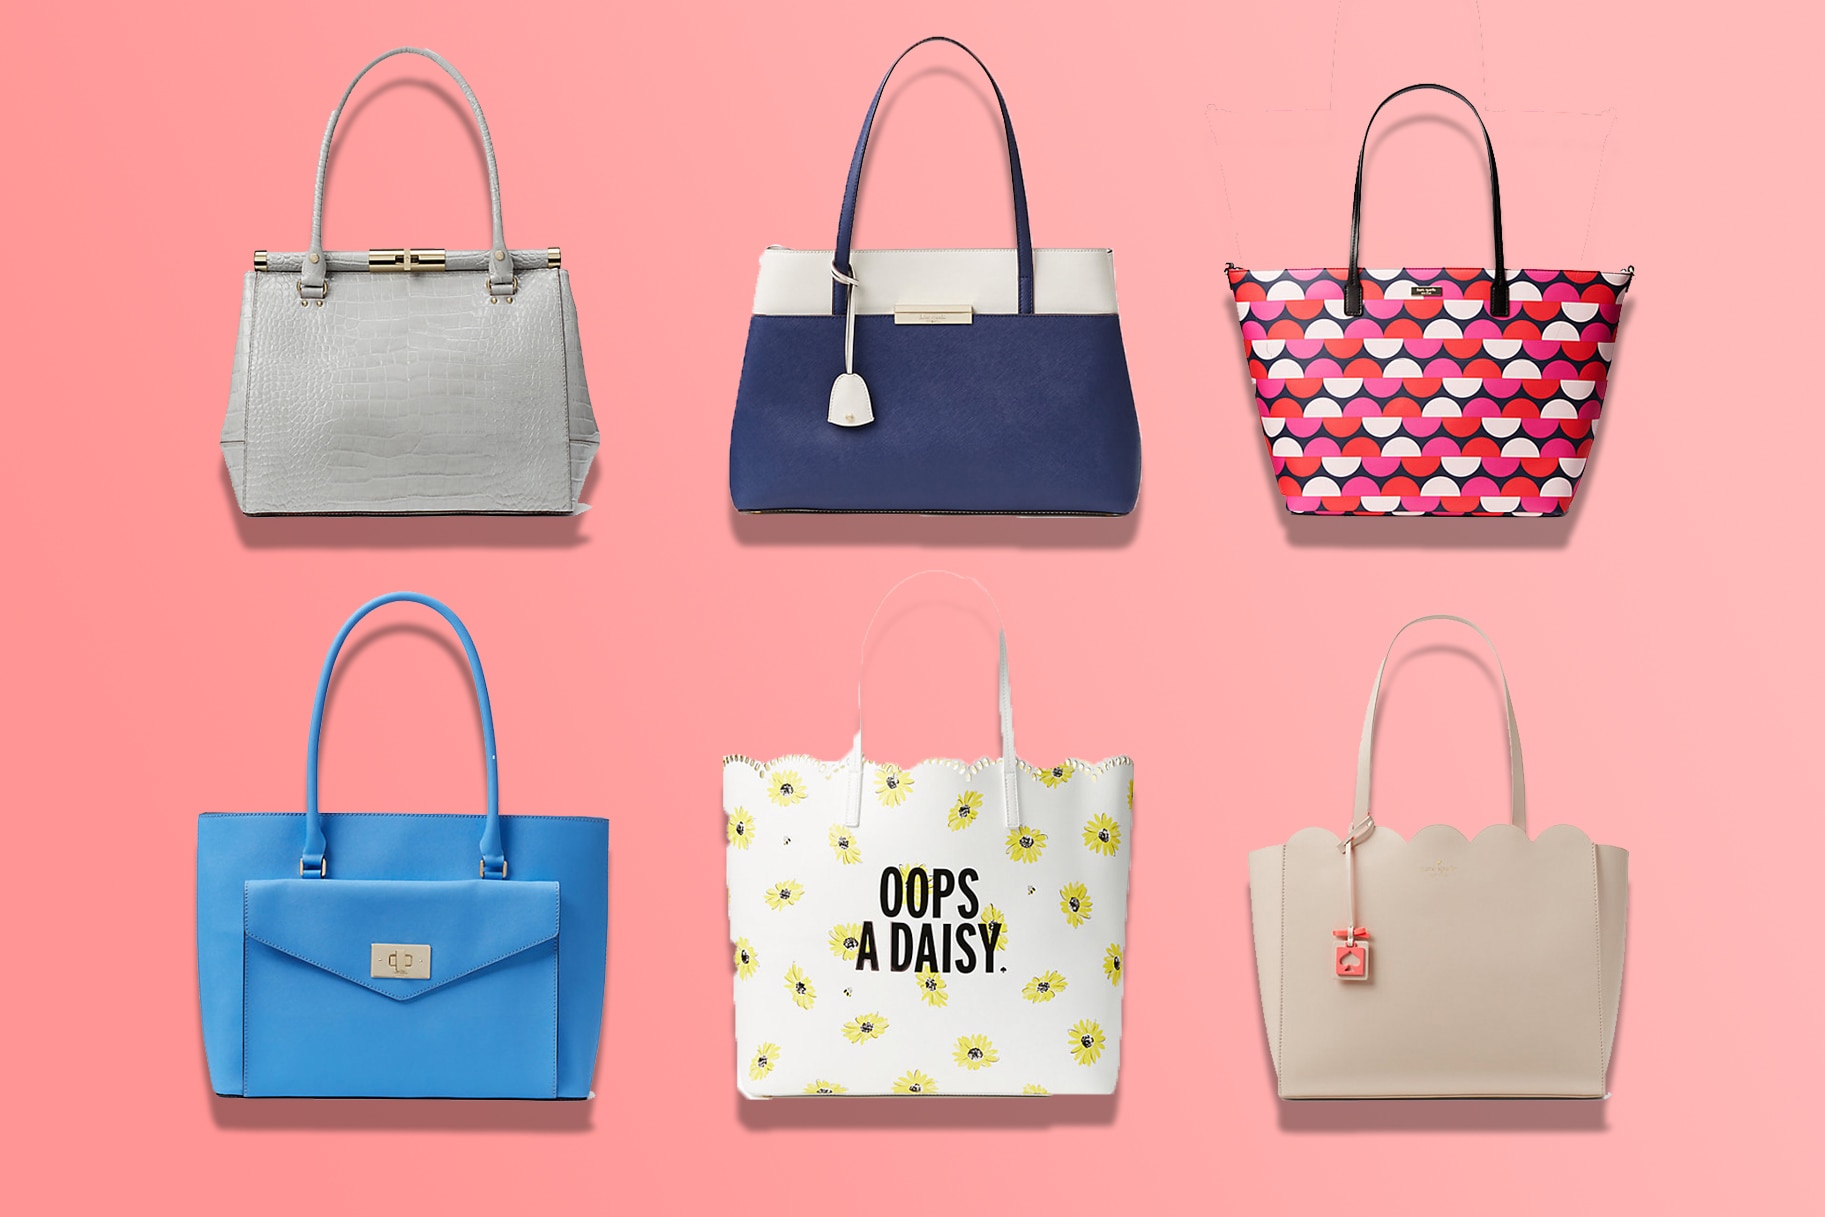 Kate Spade Surprise Sale on Bags, Jewelry & Accessories | Style & Living